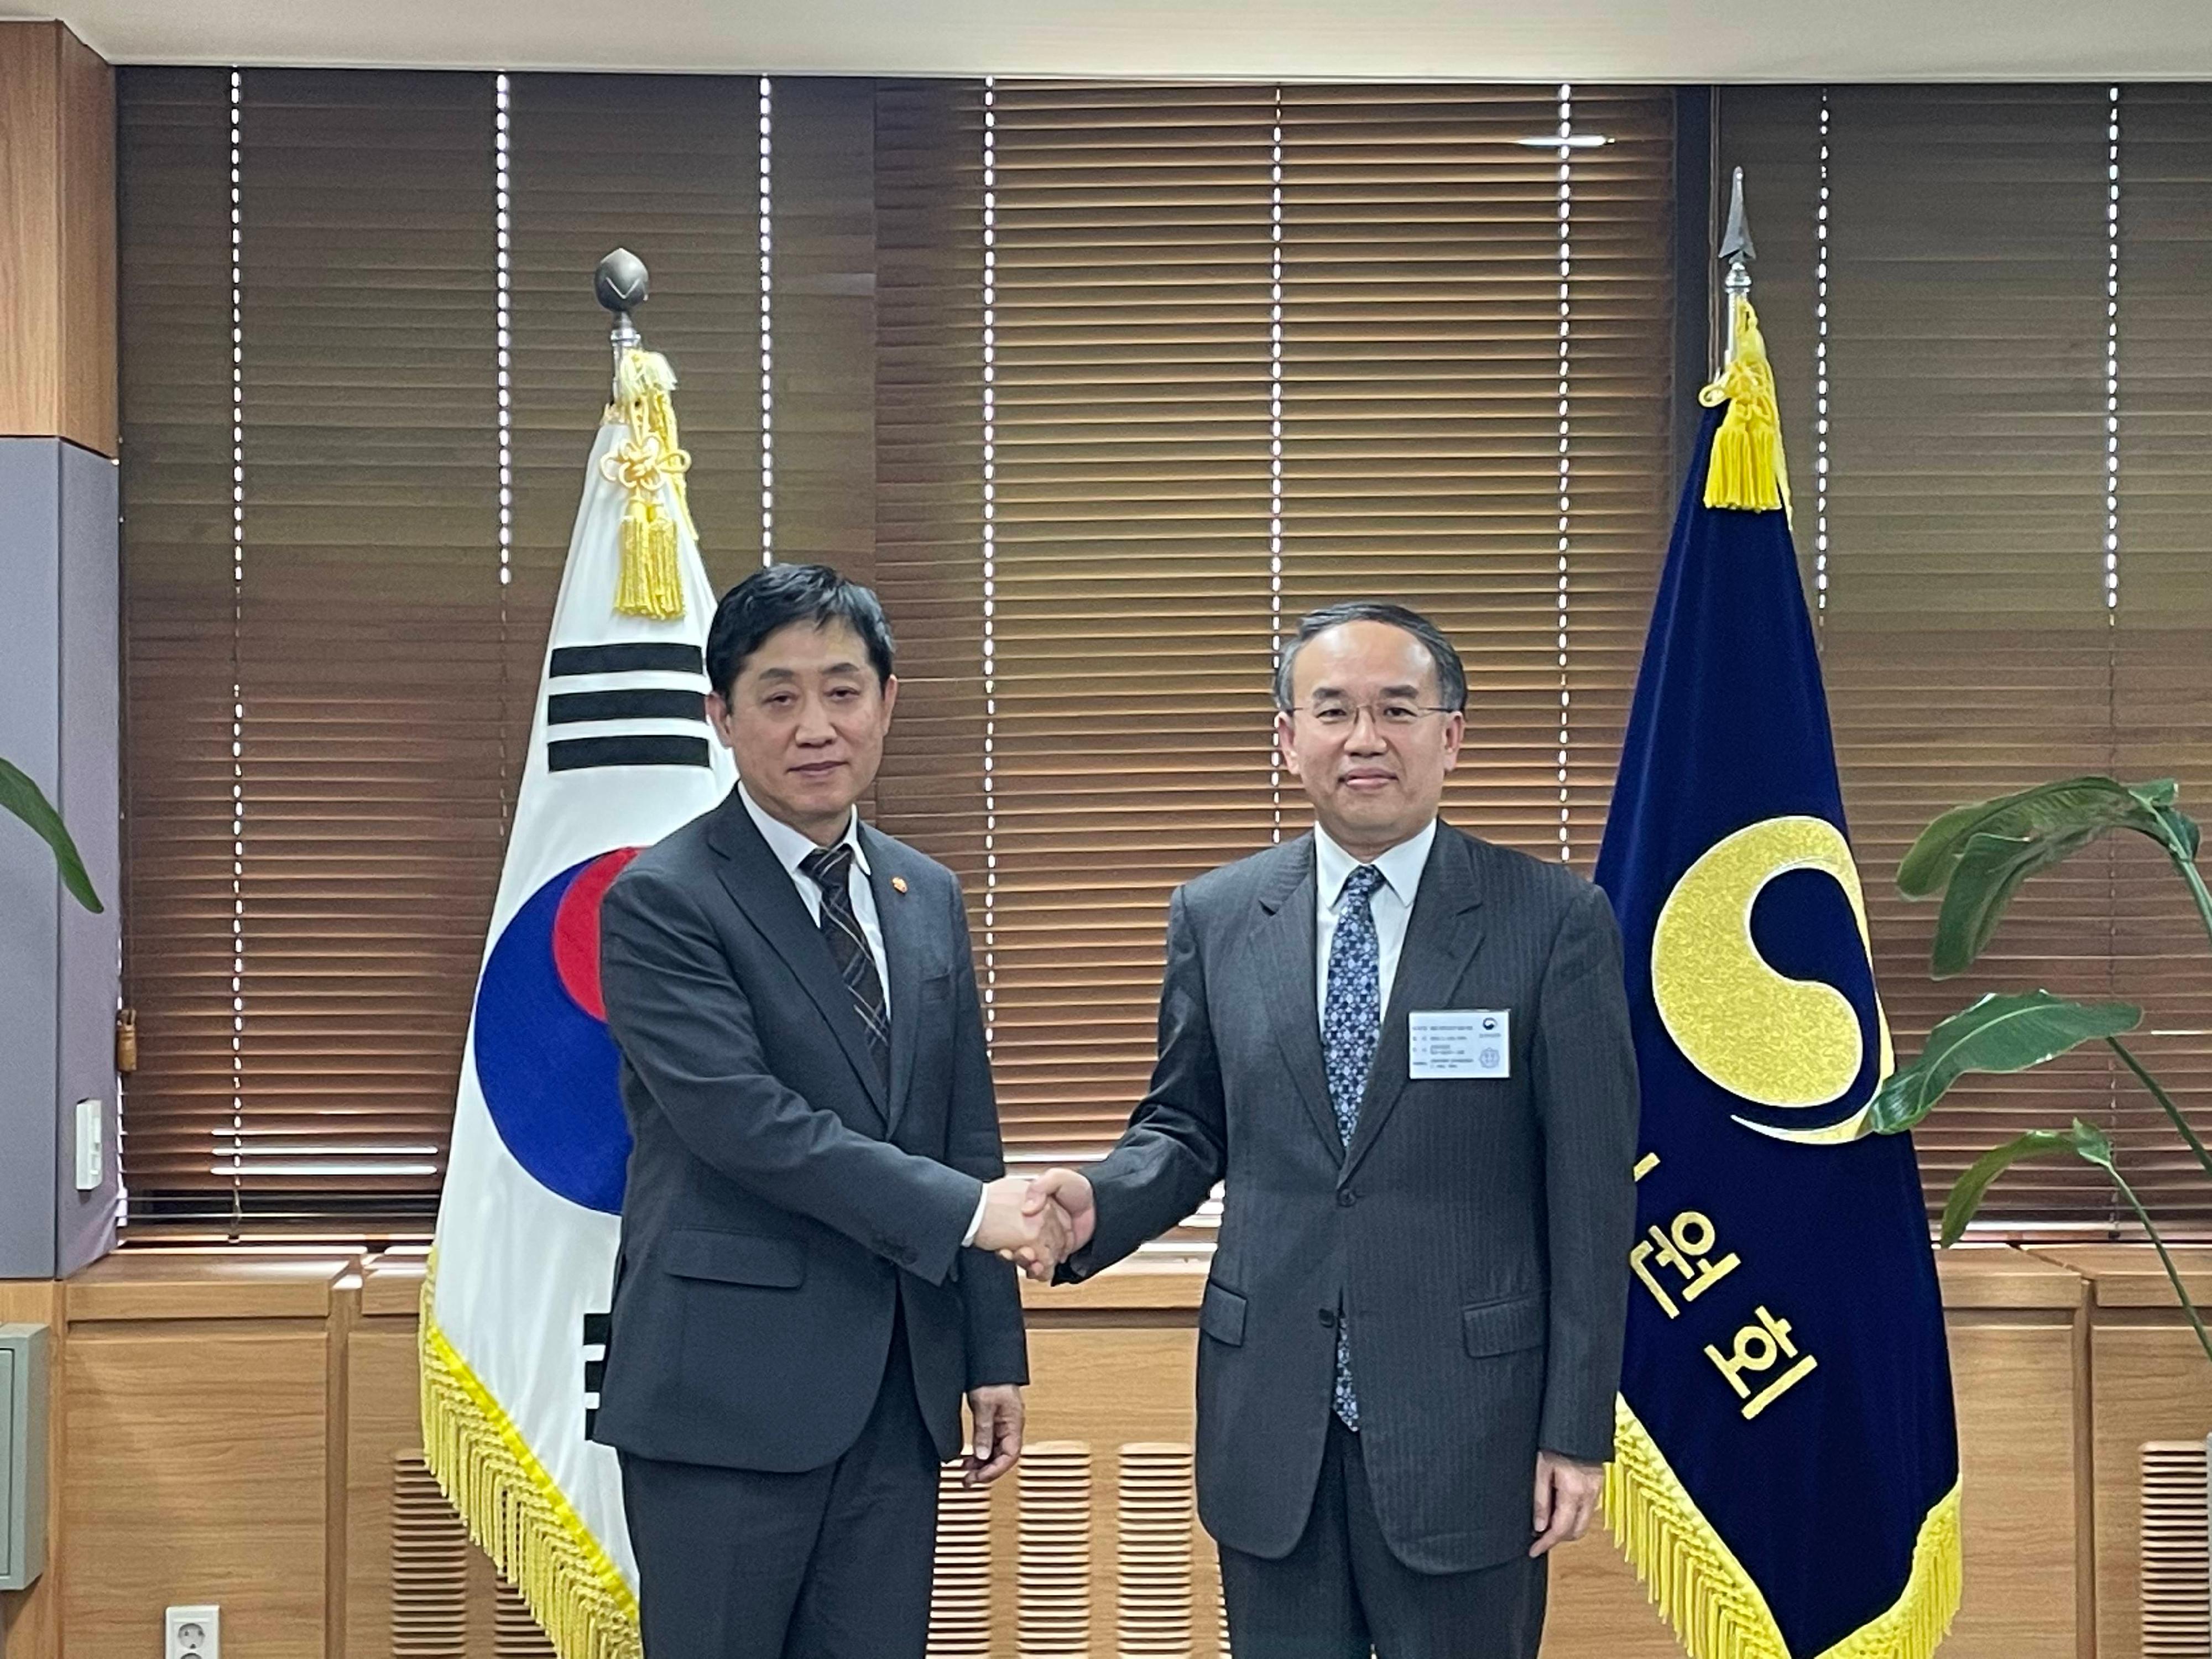 The Secretary for Financial Services and the Treasury, Mr Christopher Hui, continued his visit in Incheon, Korea, today (May 4). Photo shows Mr Hui (right) meeting with the Chairman of the Financial Services Commission of Korea, Mr Kim Joo-hyun (left).